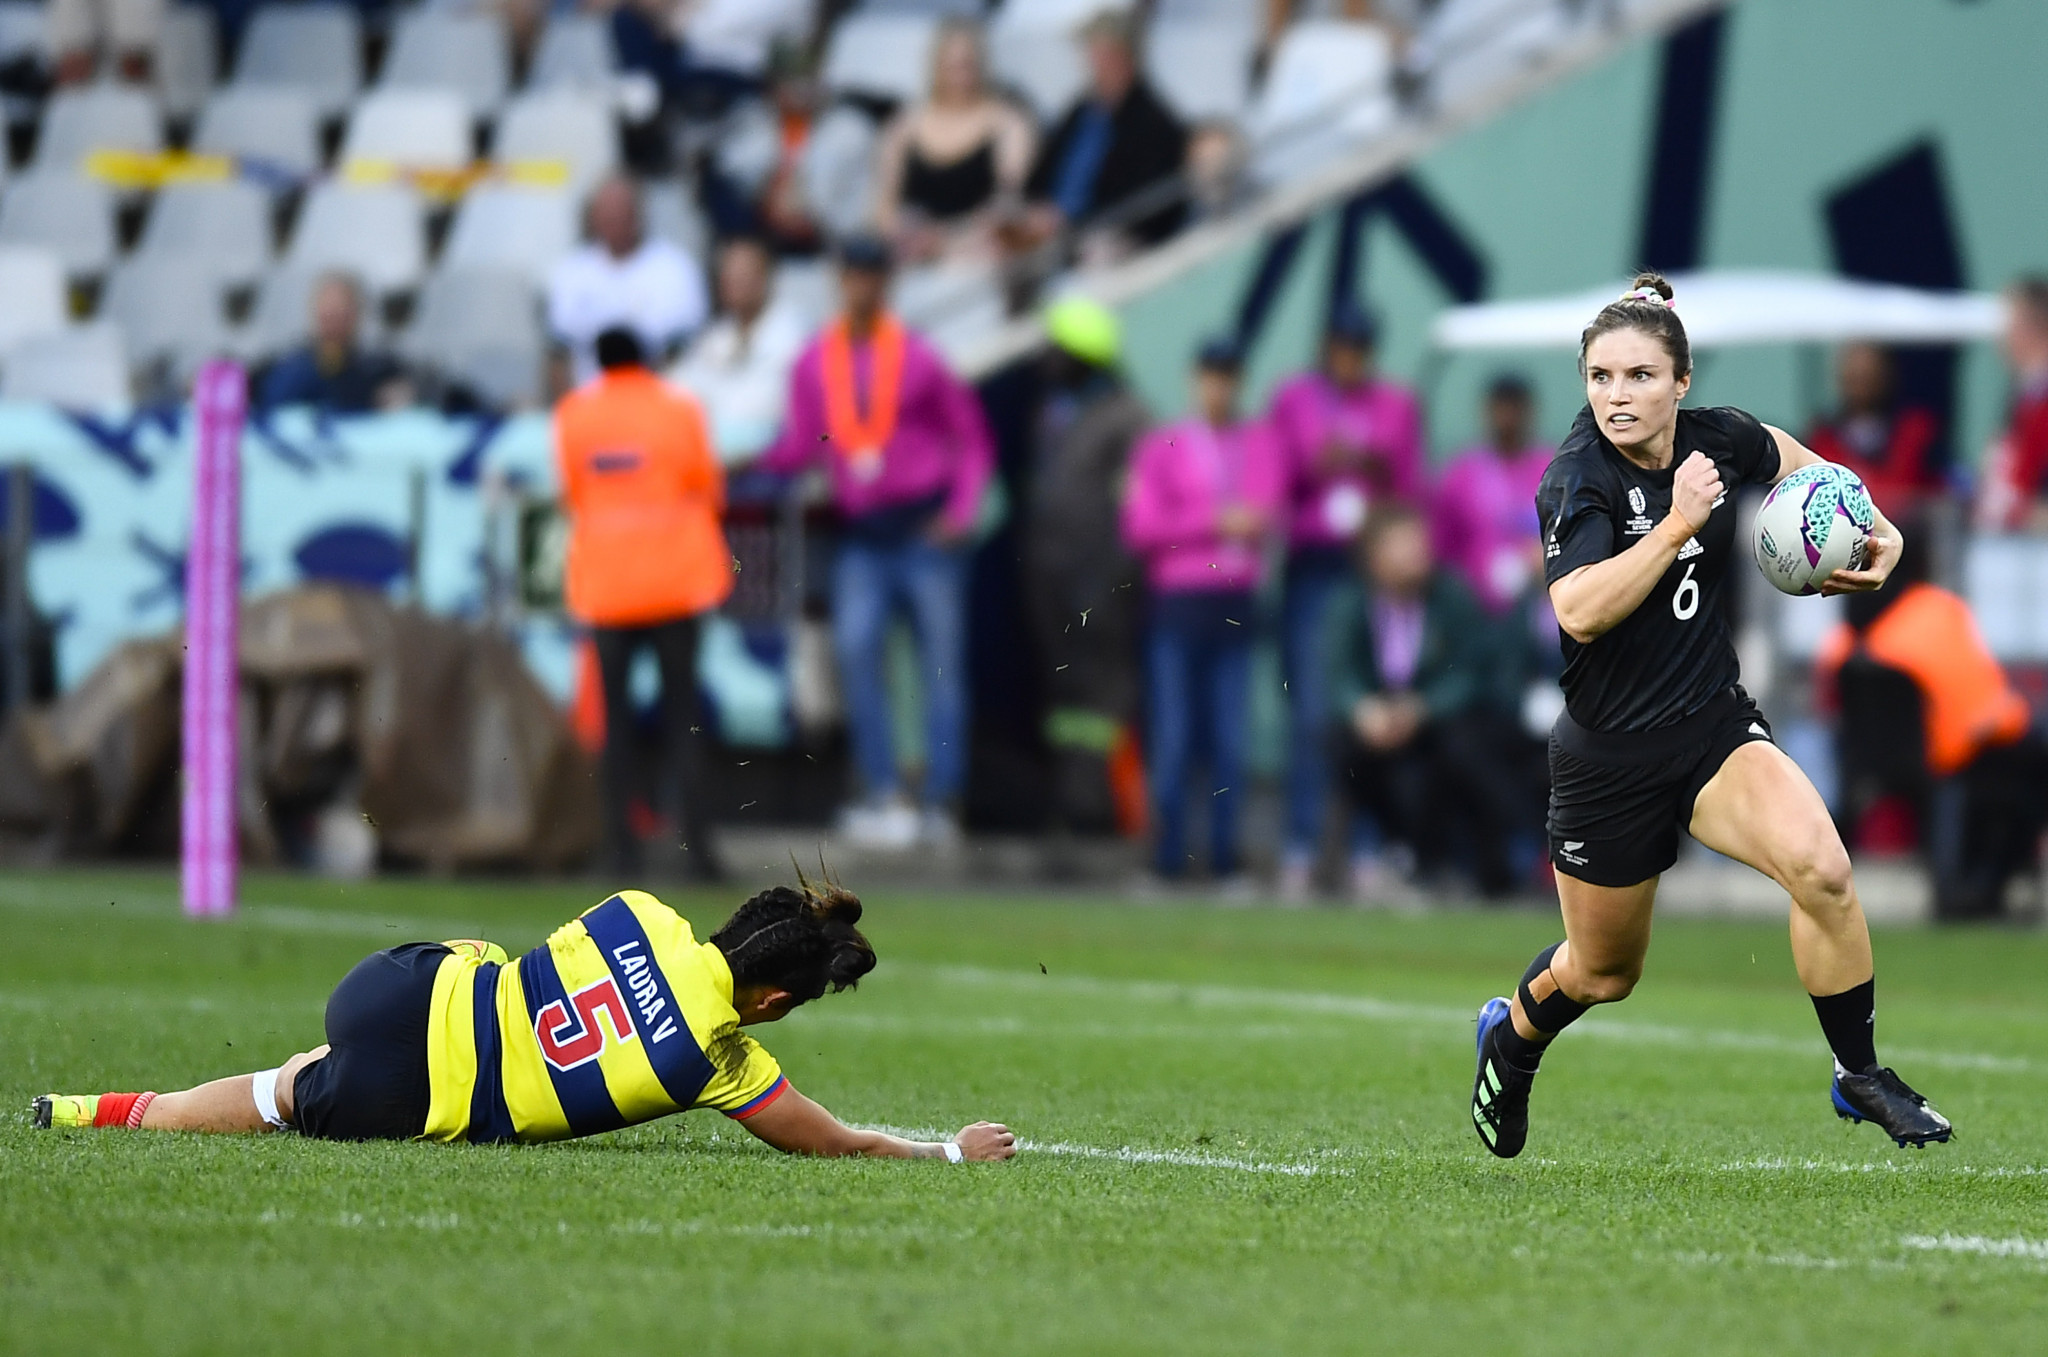 New Zealand cruise into next round at Rugby World Cup Sevens